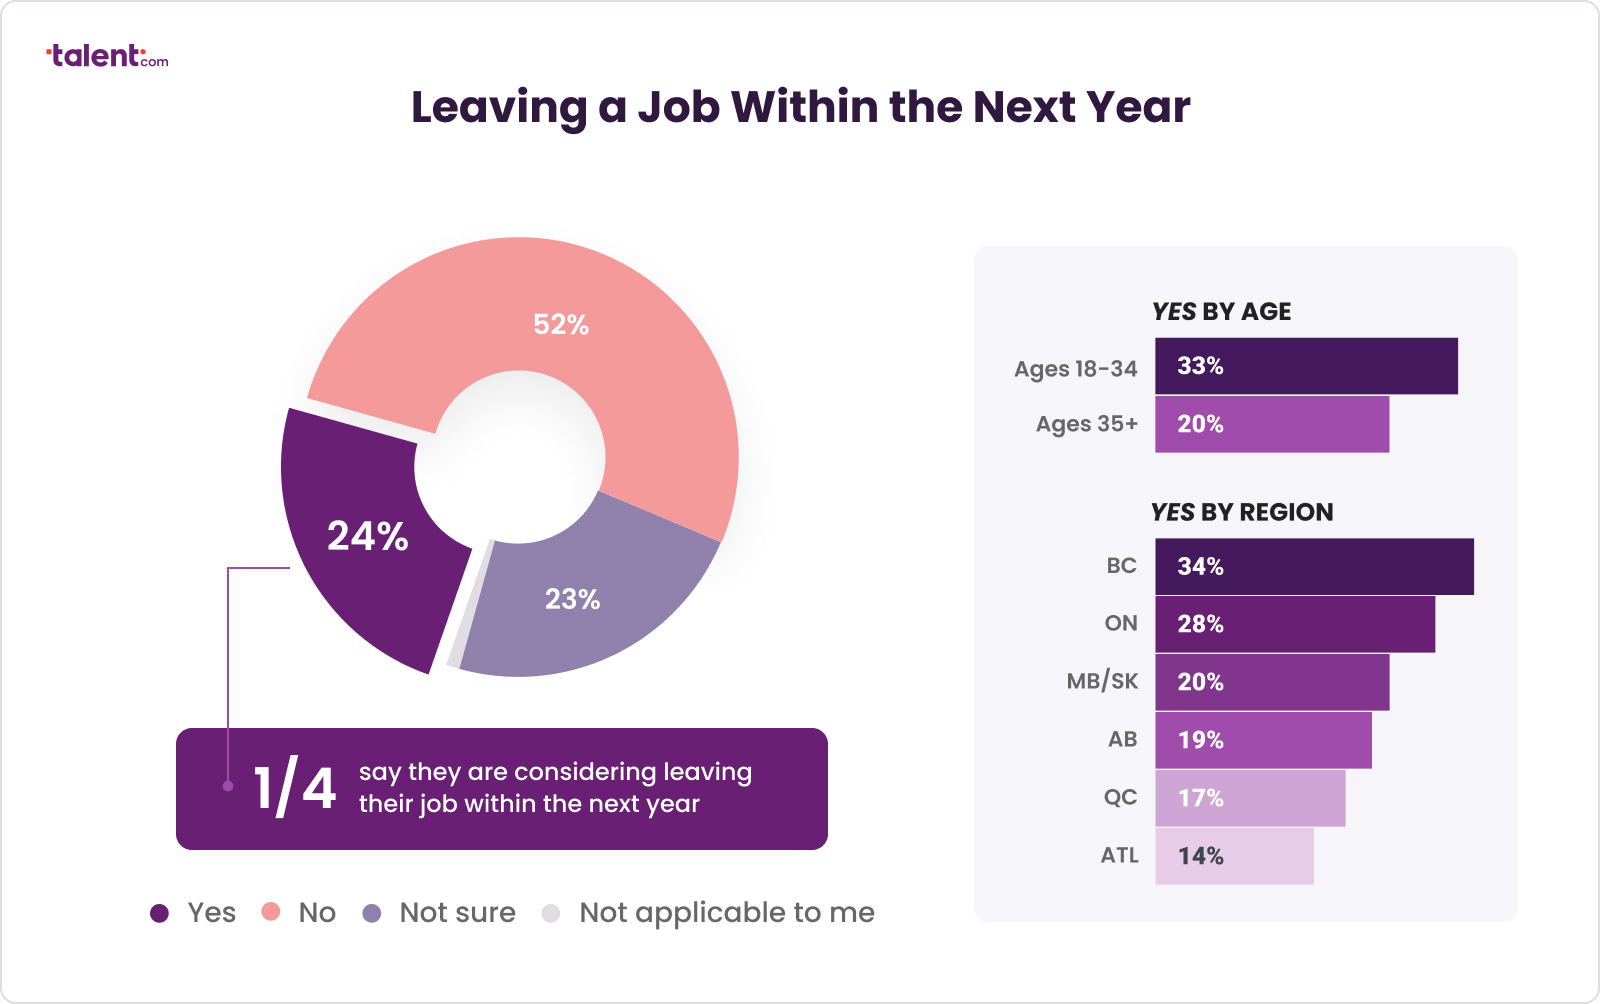 Canadians' opinions on whether they are likely to leave their job in the coming year